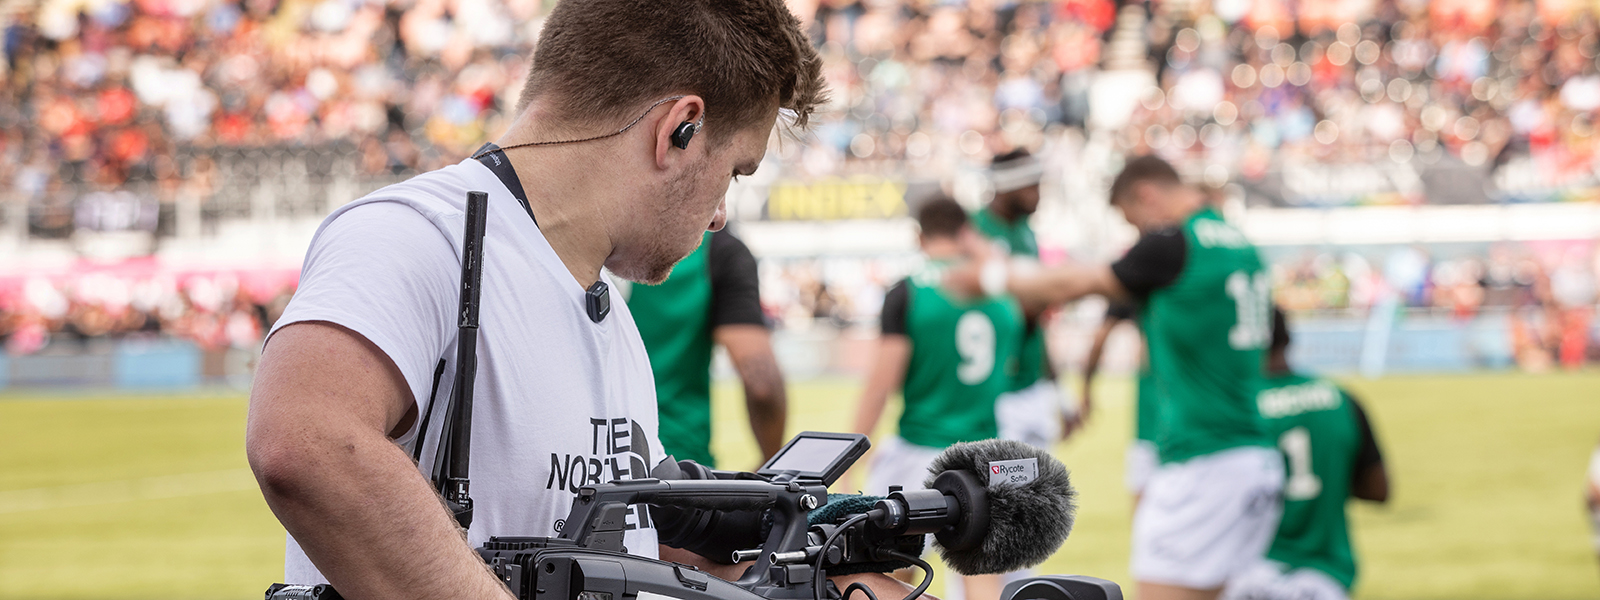 The Saracens Rugby match being filmed